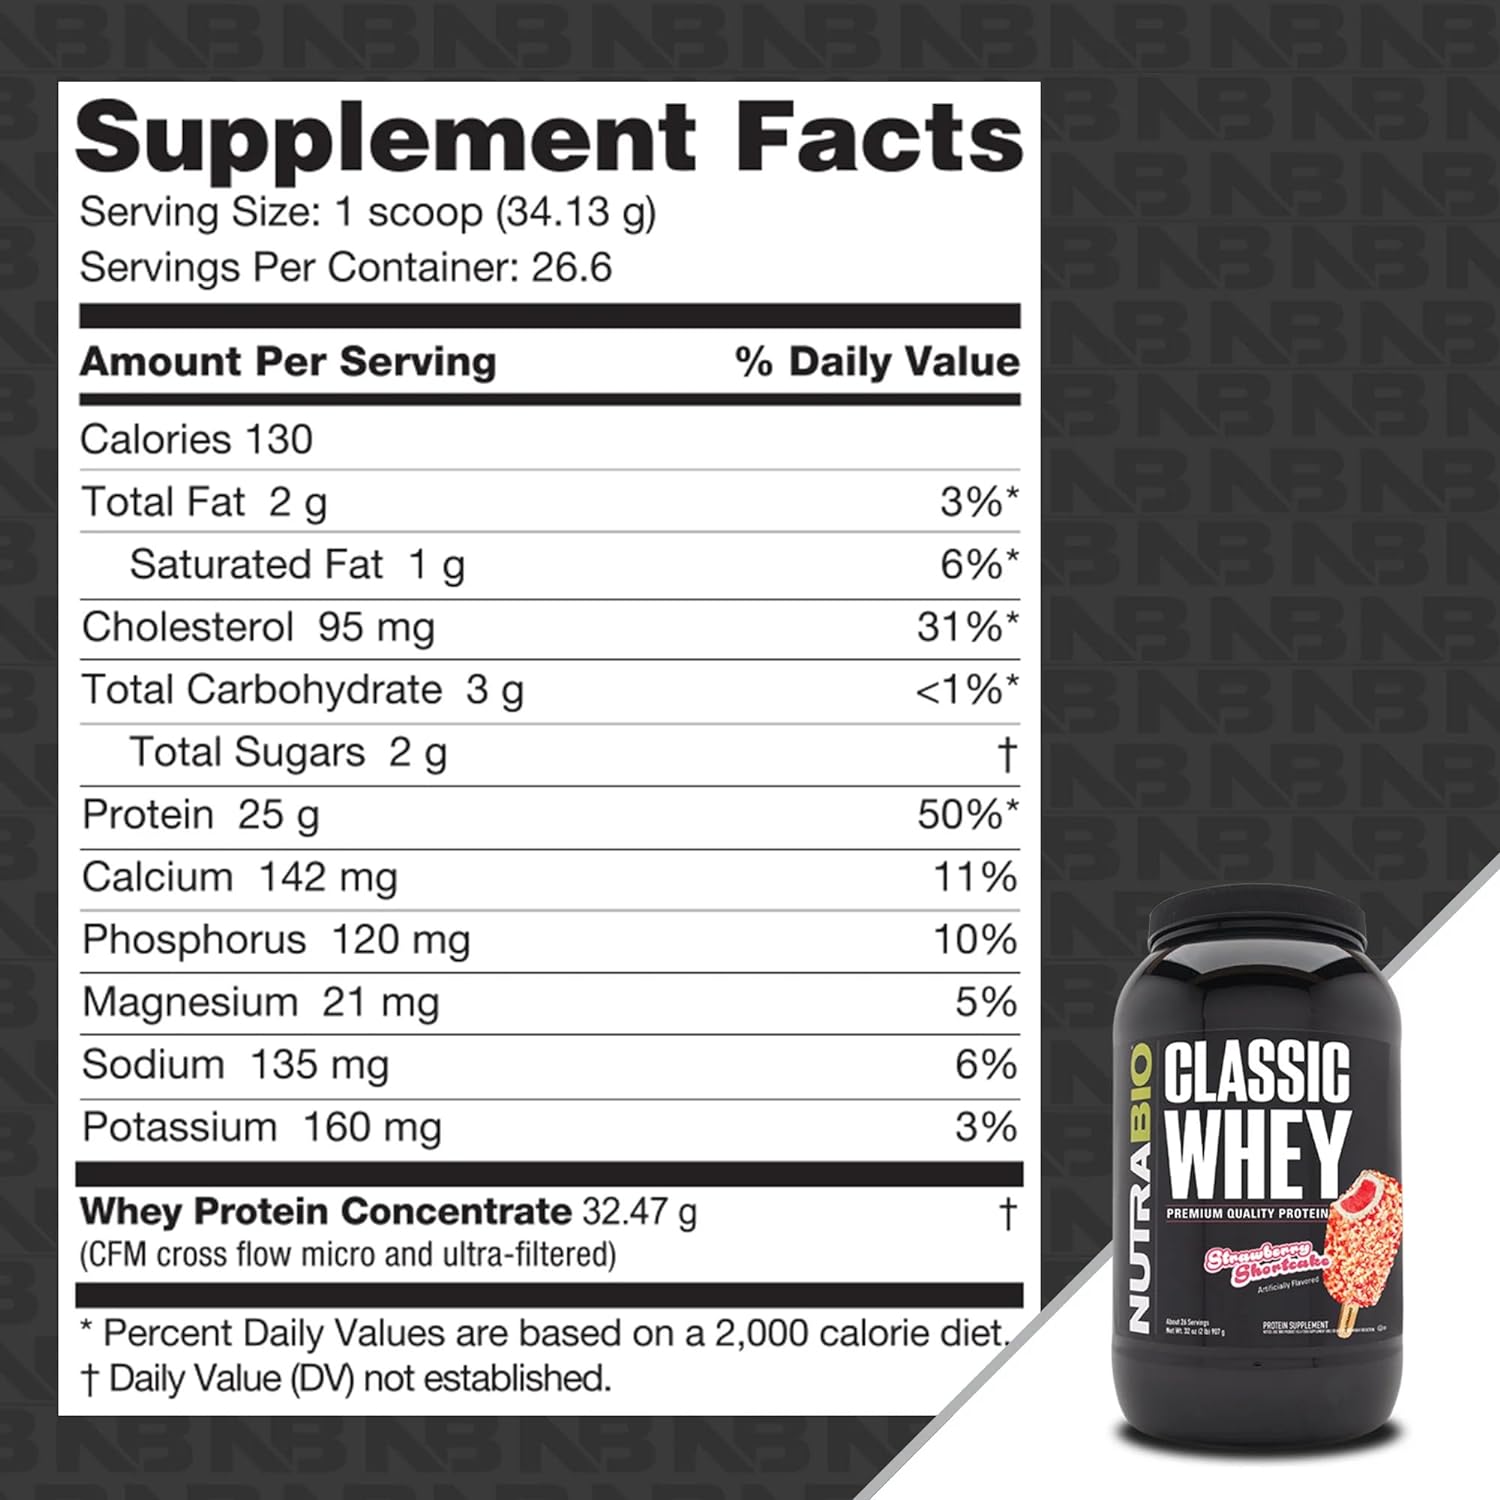 NutraBio Classic Whey Protein Powder Supplement - 25g of Protein Per Scoop - Full-Spectrum Amino Acid Profile with No Fillers, Artificial Colors, or Preservatives - Strawberry Shortcake, 2 Pounds : Health & Household